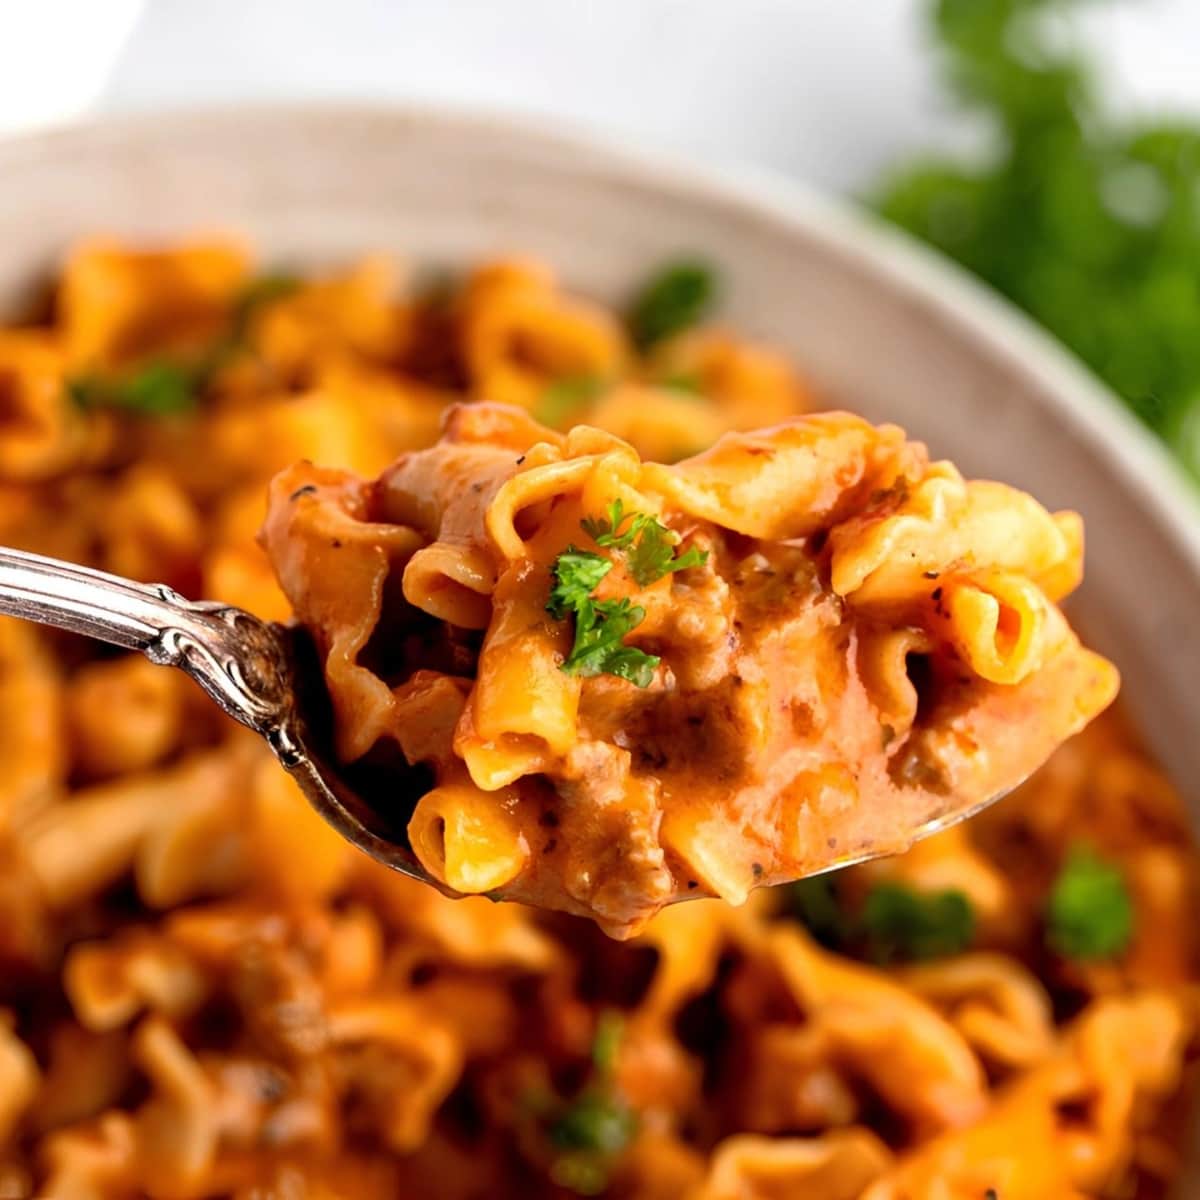 A spoonful of hamburger helper pasta with meaty sauce